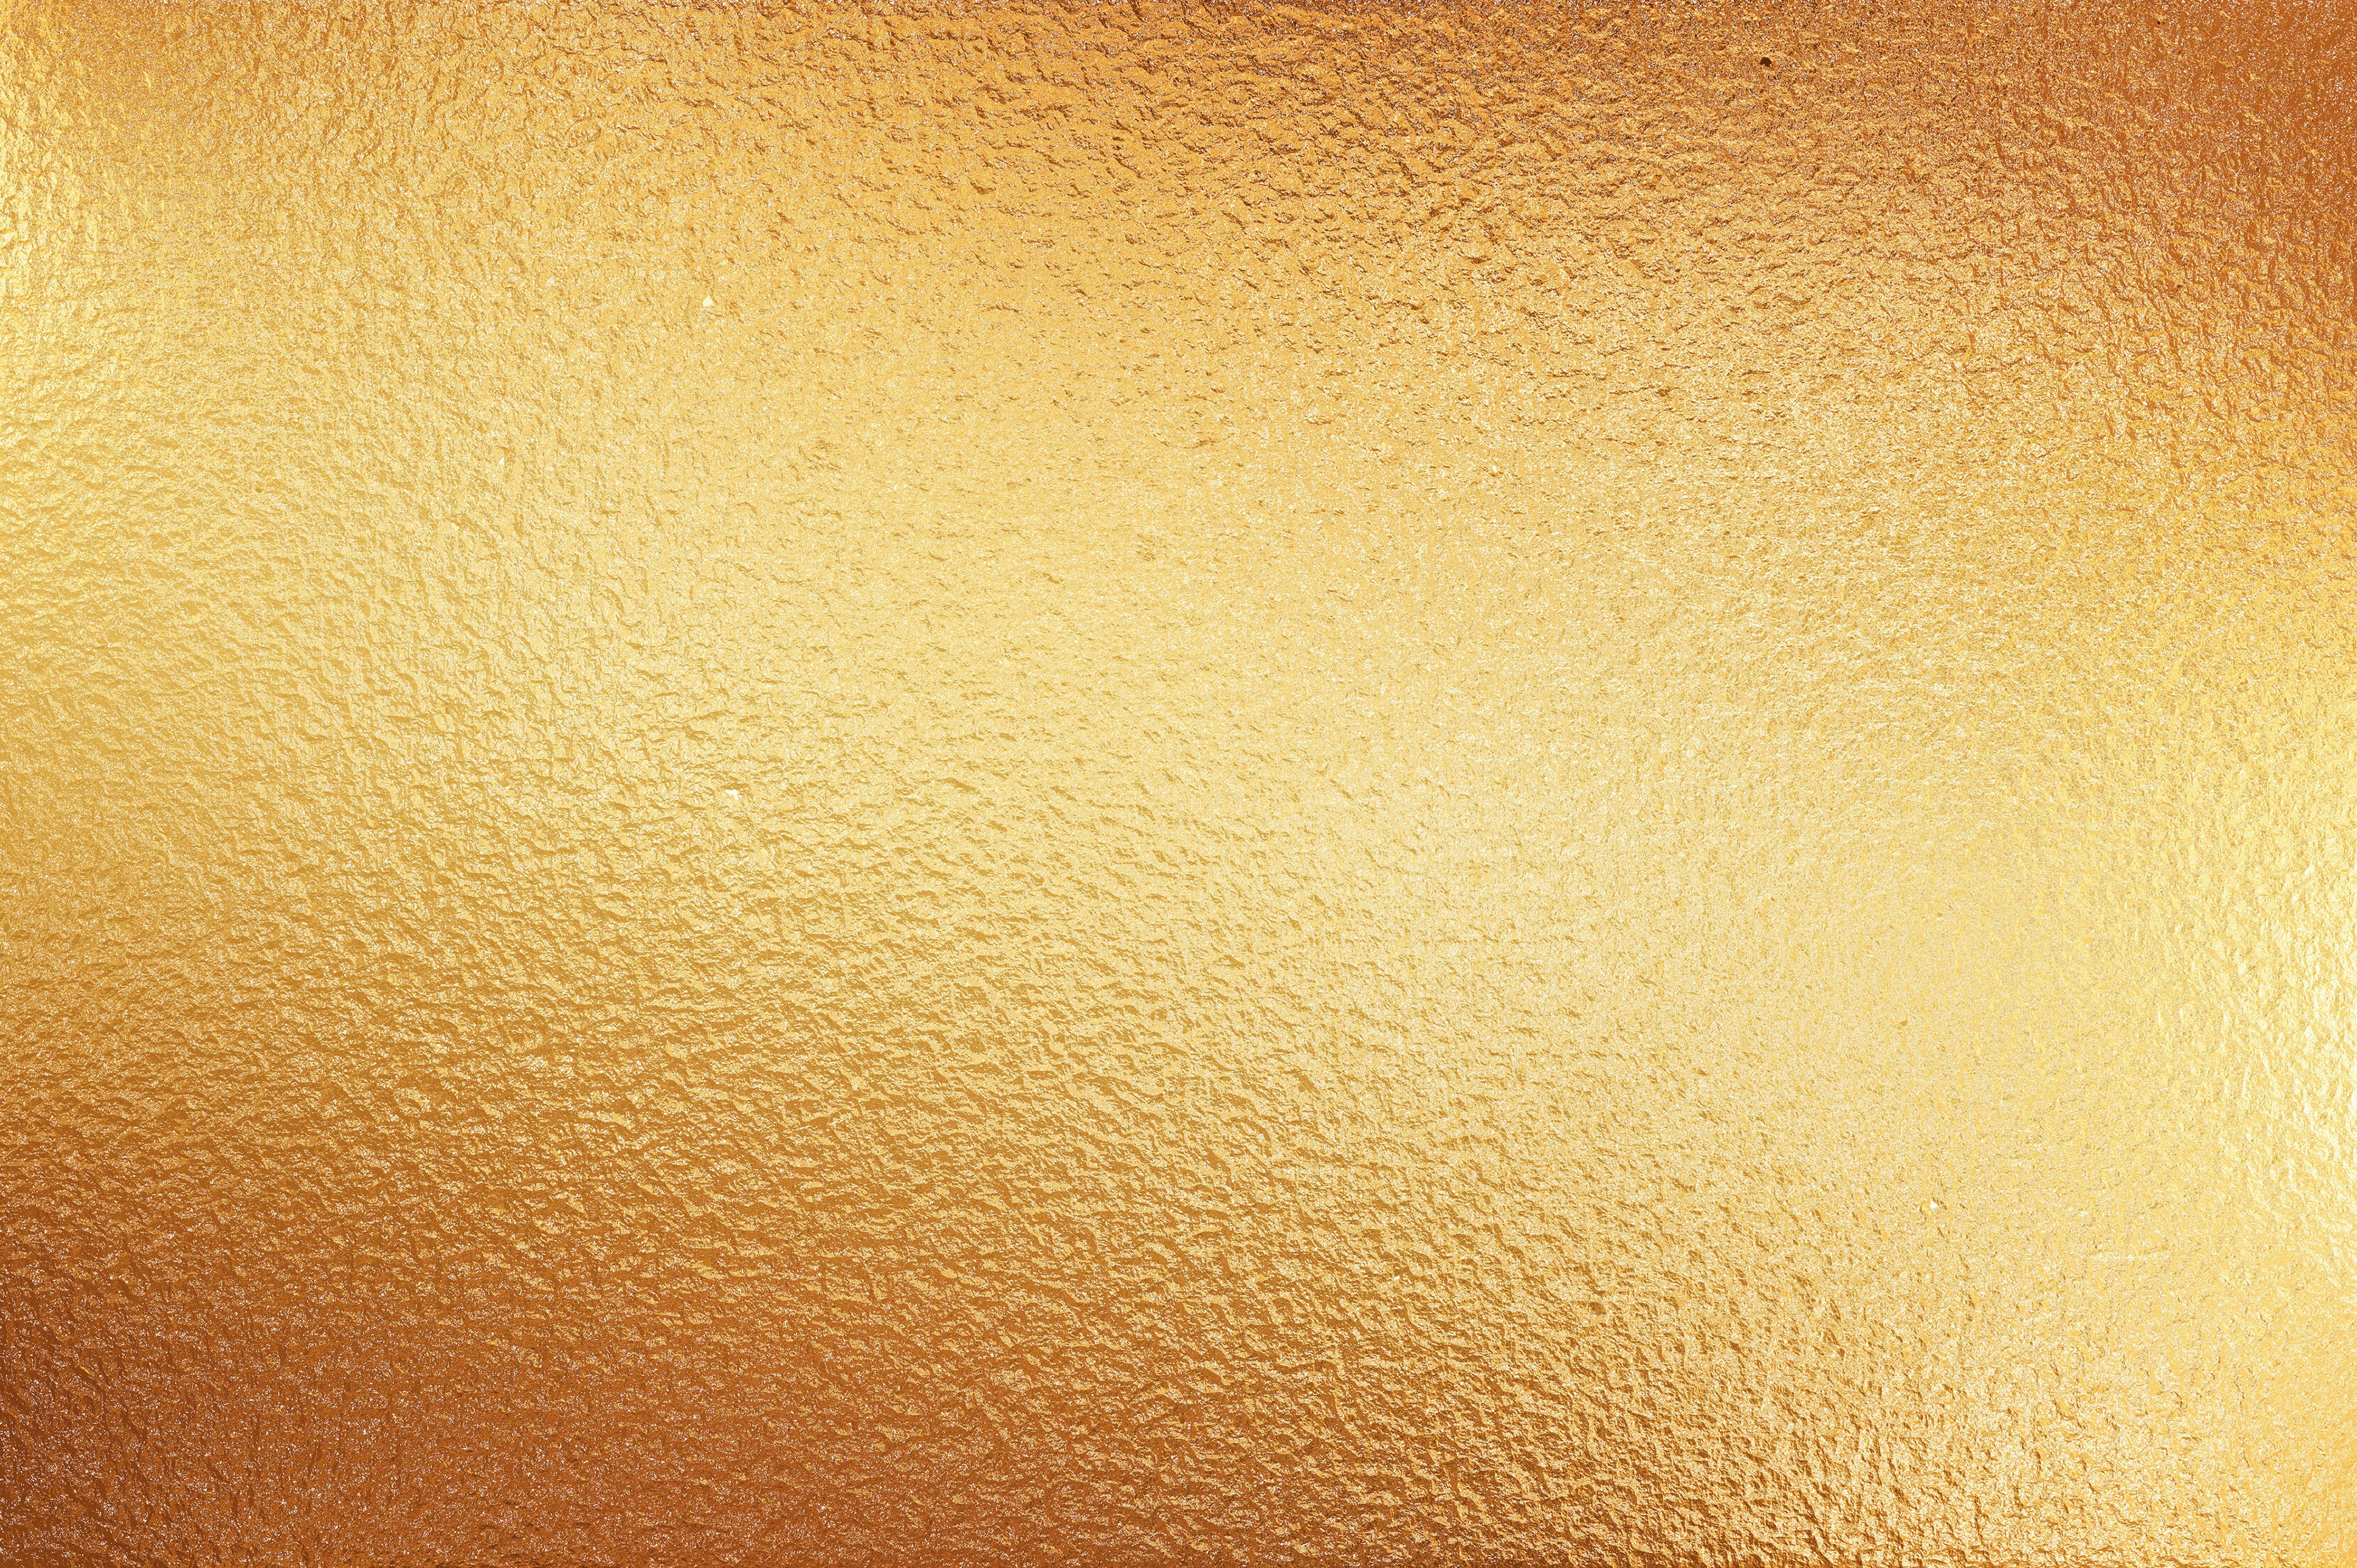 Gold Foil Texture Free A Large Sheet Of Gold Metal Foil Texture